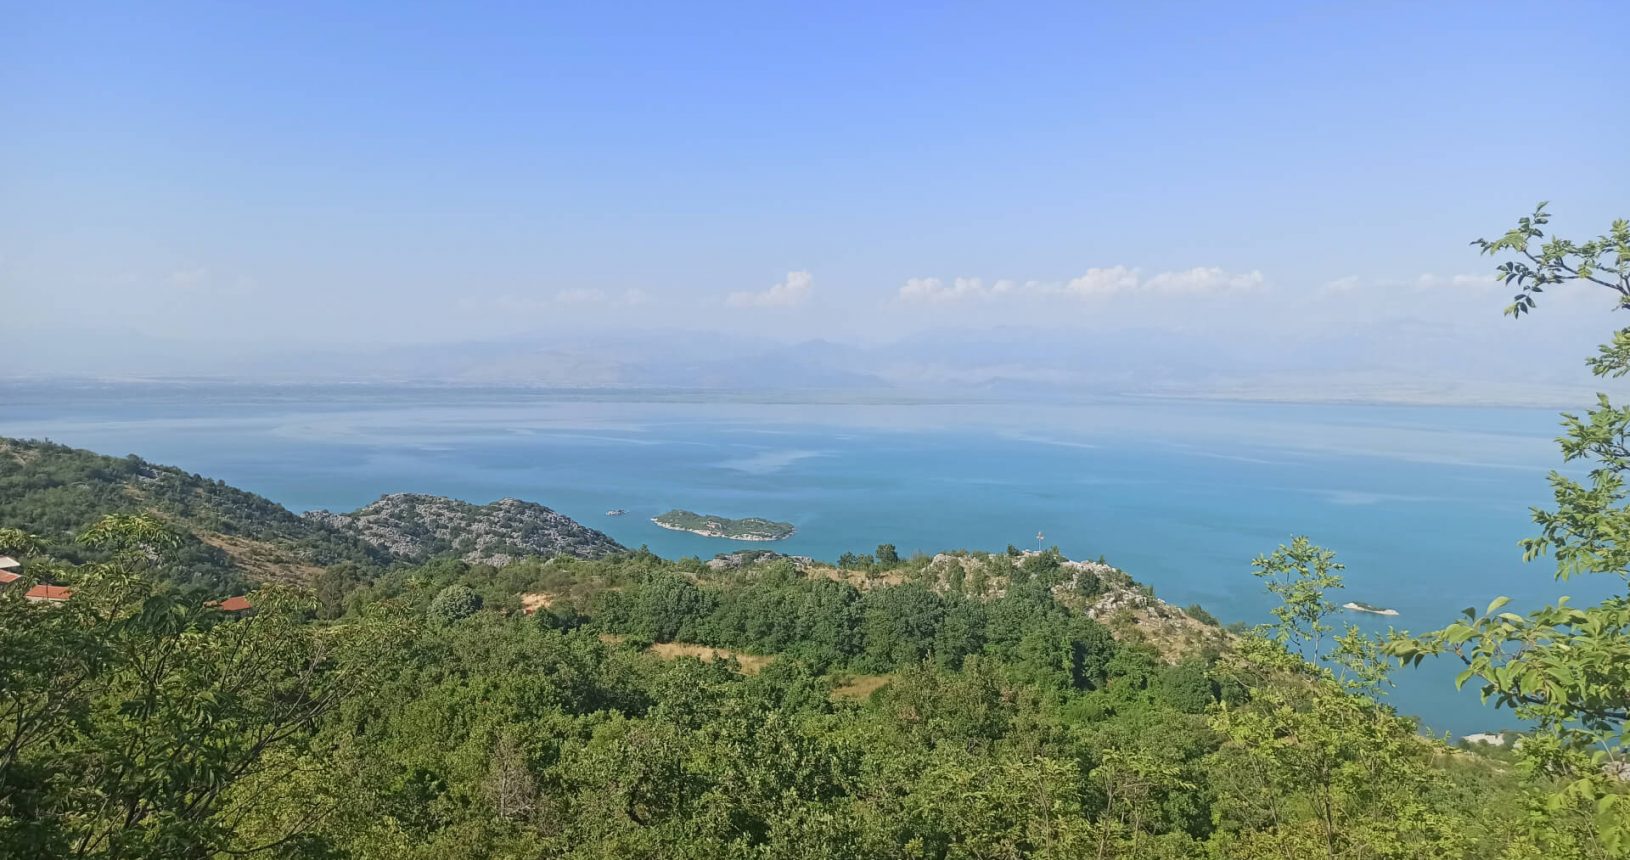 Skadar lake and green forest.